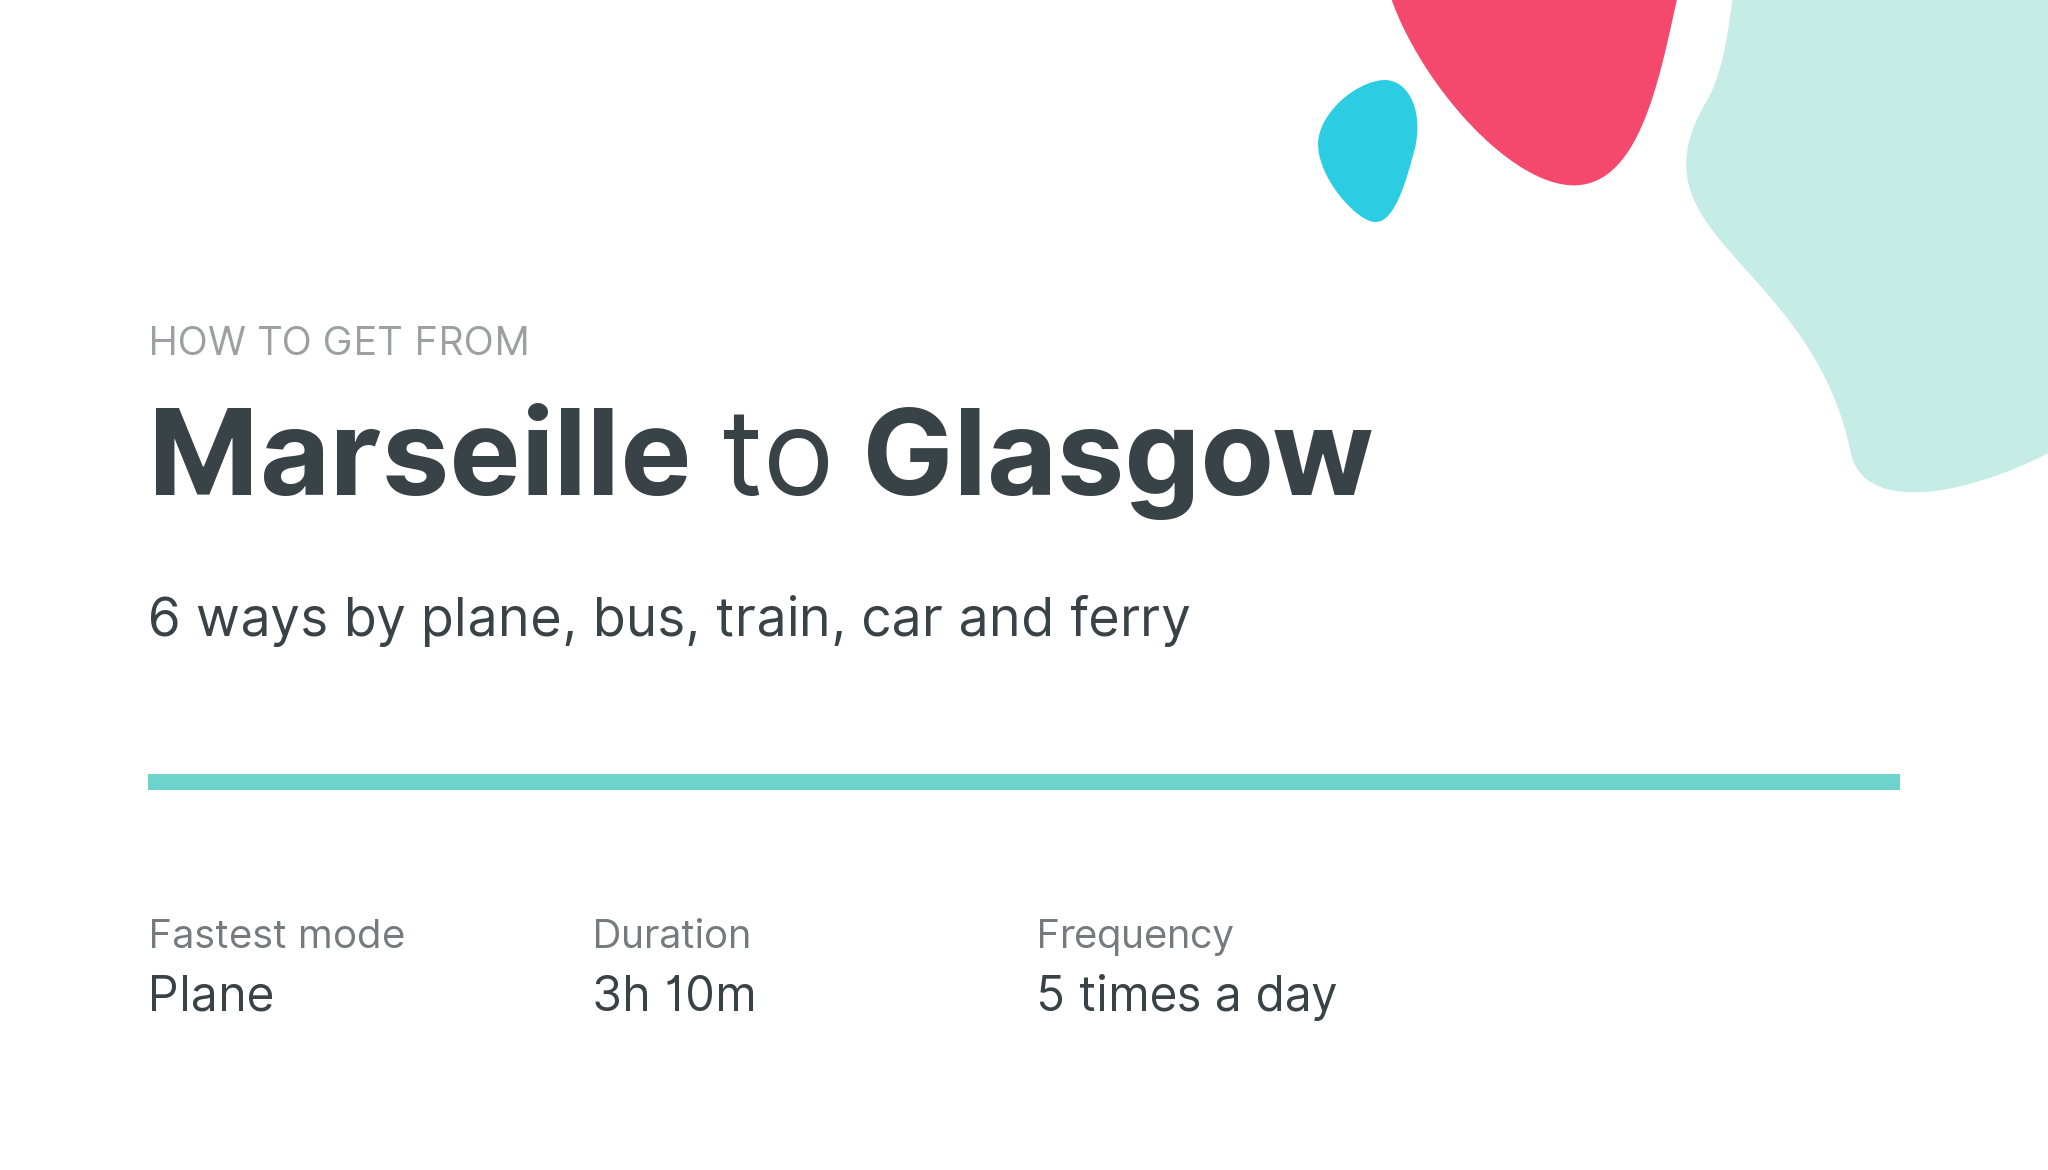 How do I get from Marseille to Glasgow